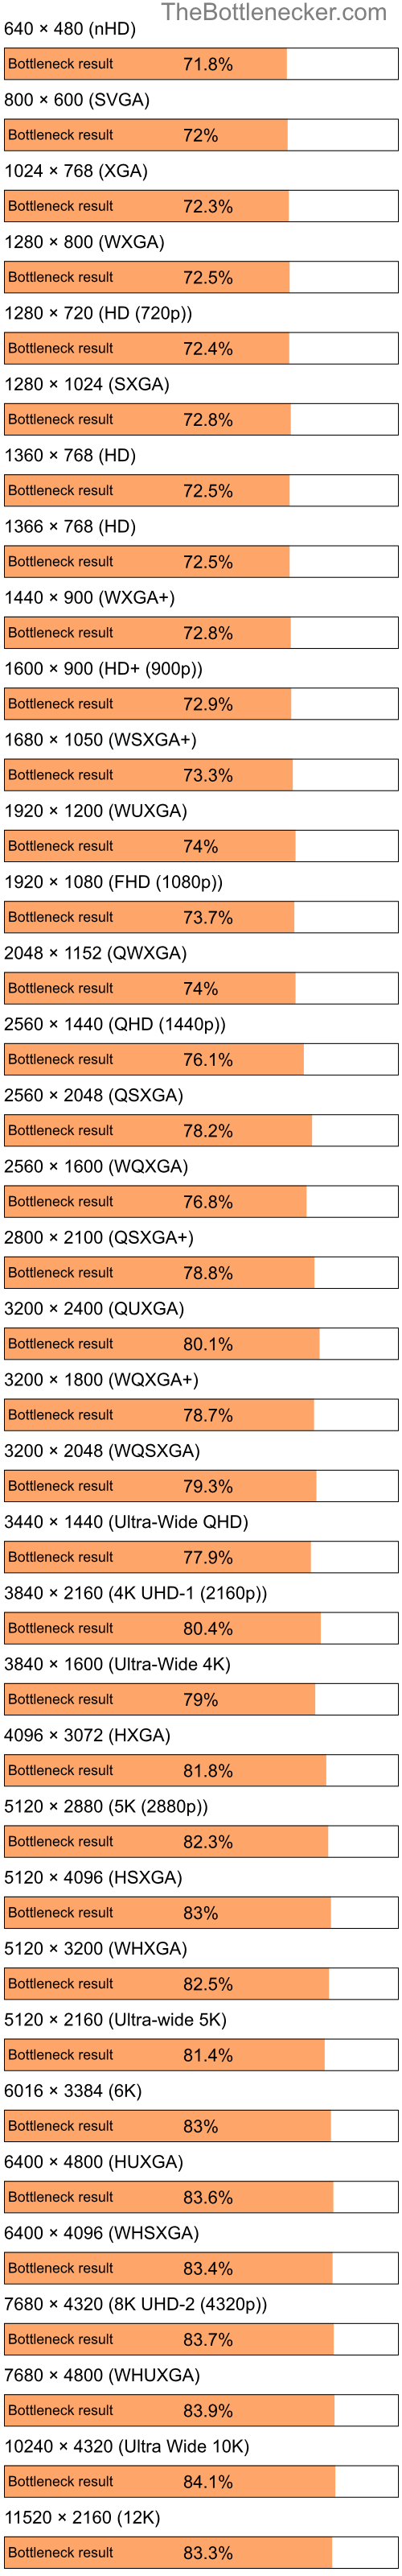 Bottleneck results by resolution for Intel Celeron and NVIDIA GeForce 9300M G in Graphic Card Intense Tasks